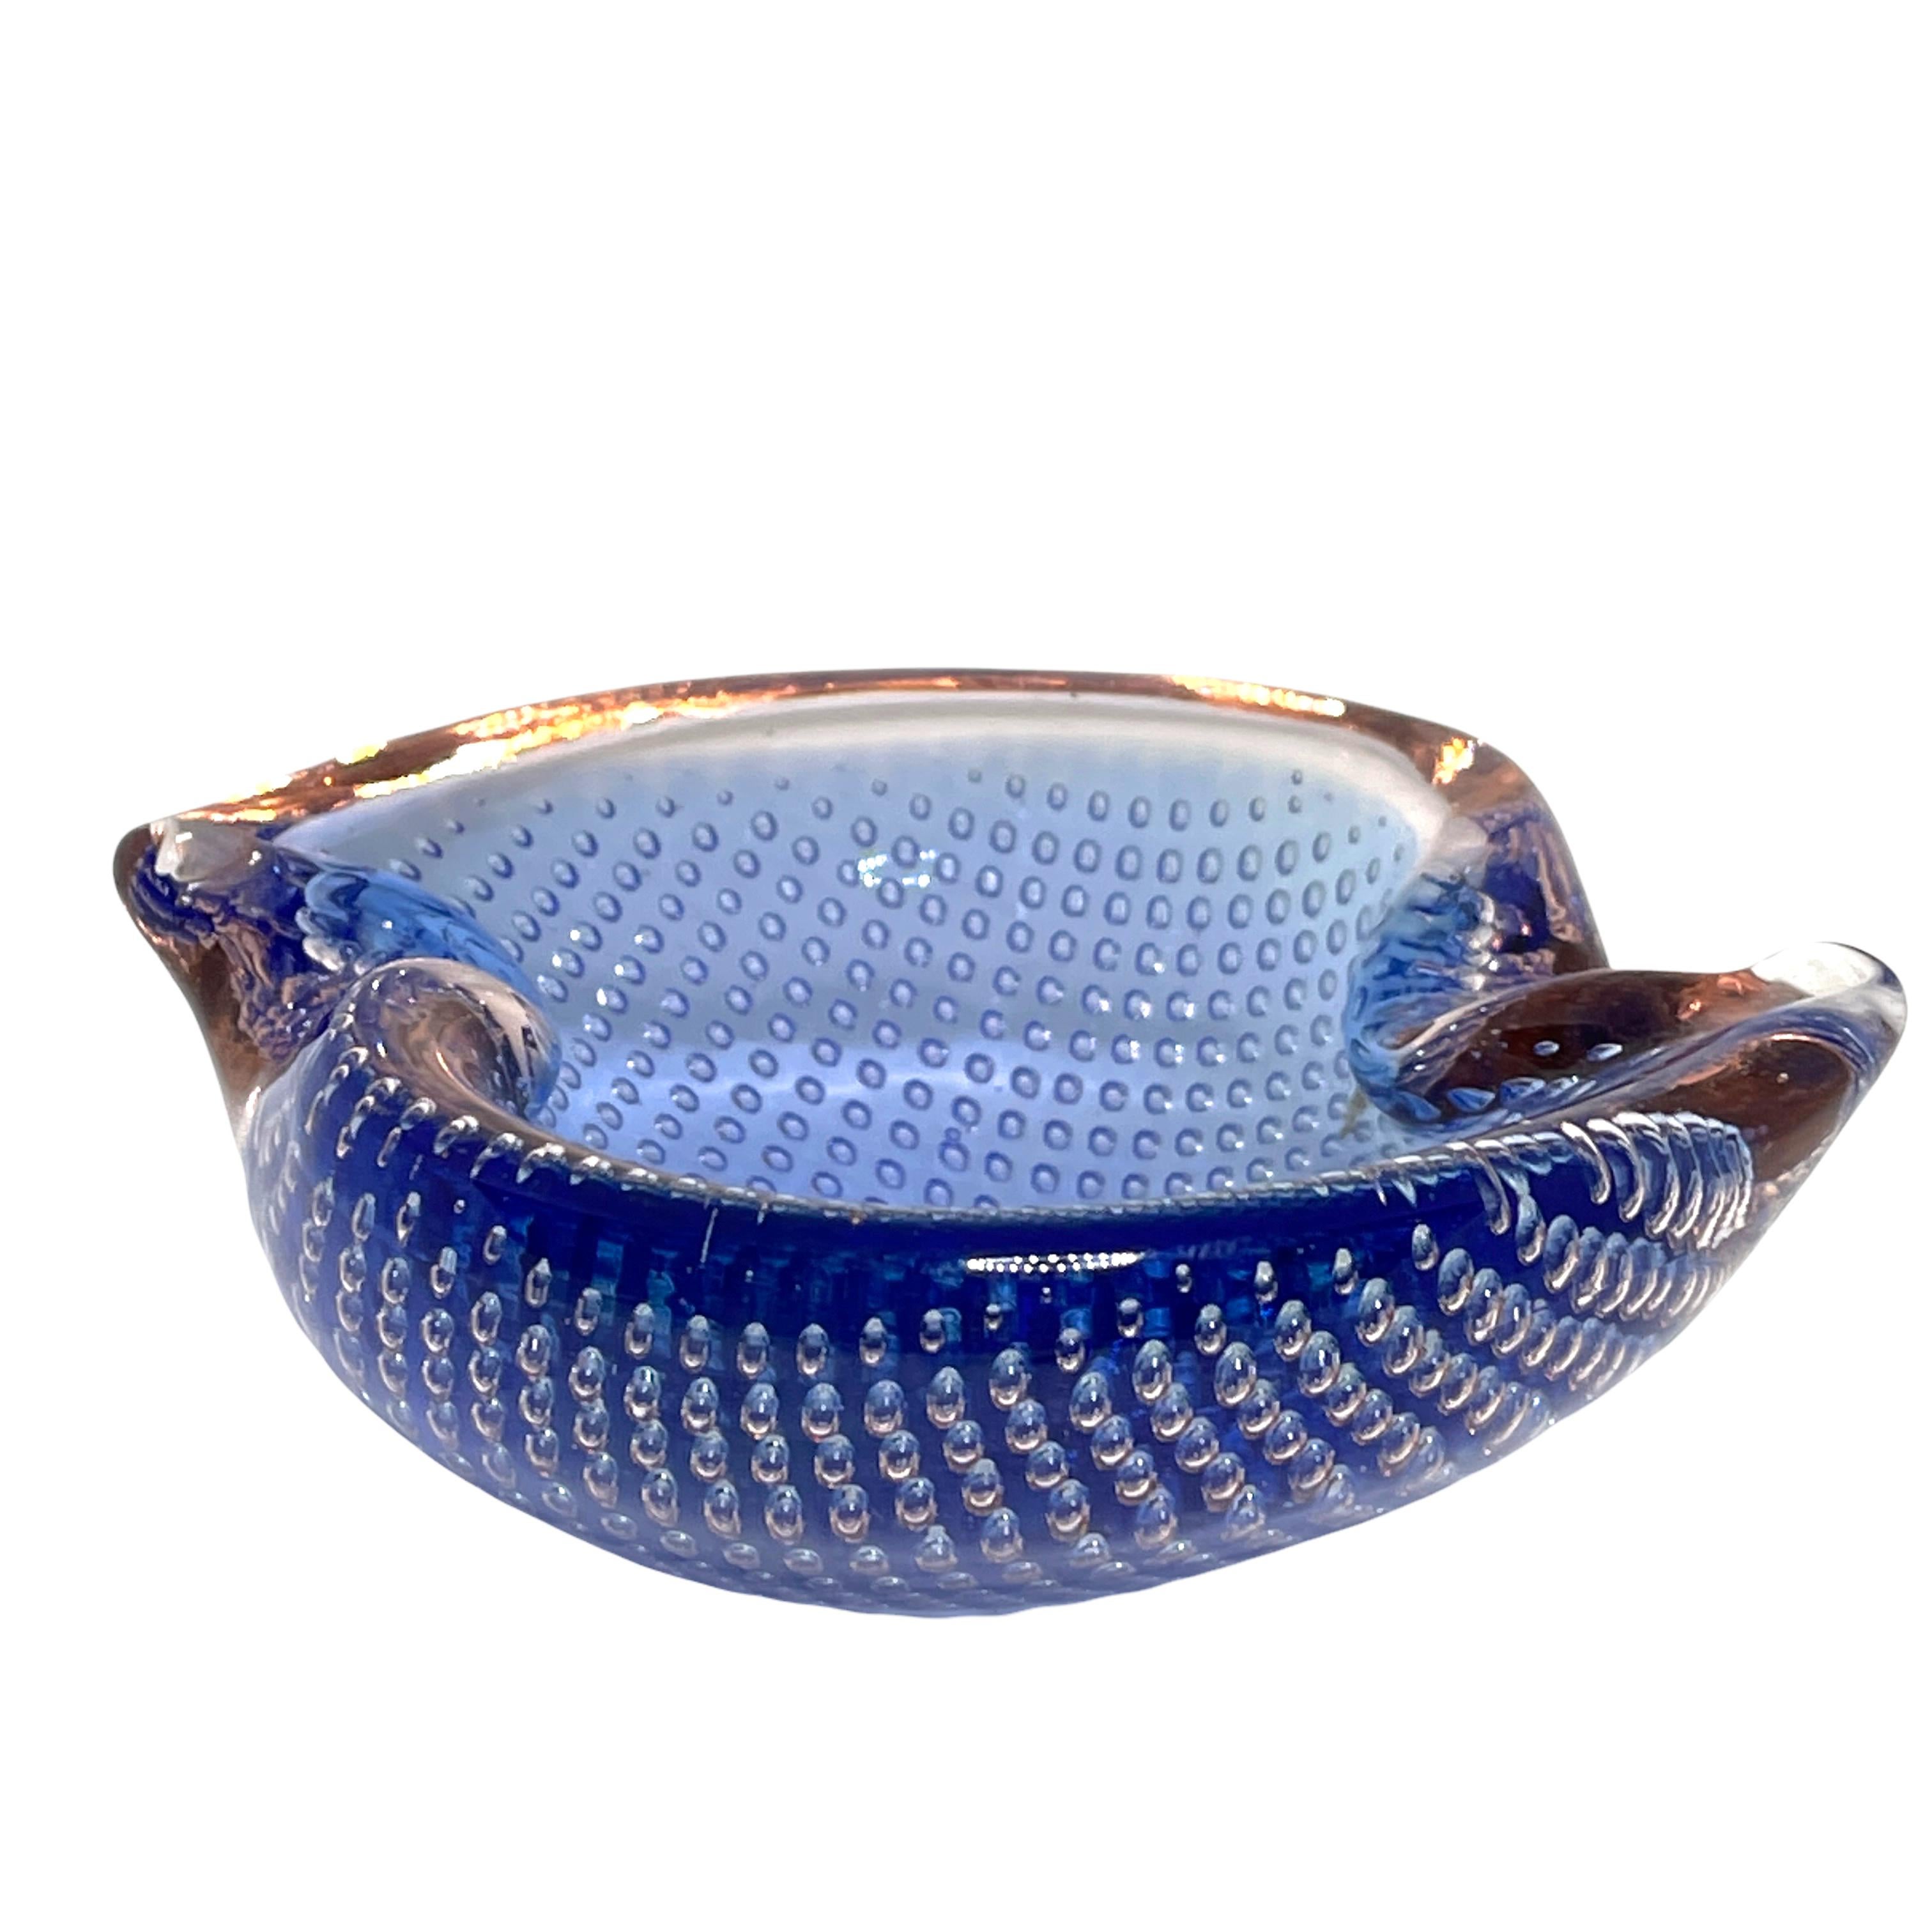 Hand-Crafted Petite Flavio Poli Murano Glass Ashtray Blue, Pink, Clear, Vintage, Italy, 1970s For Sale